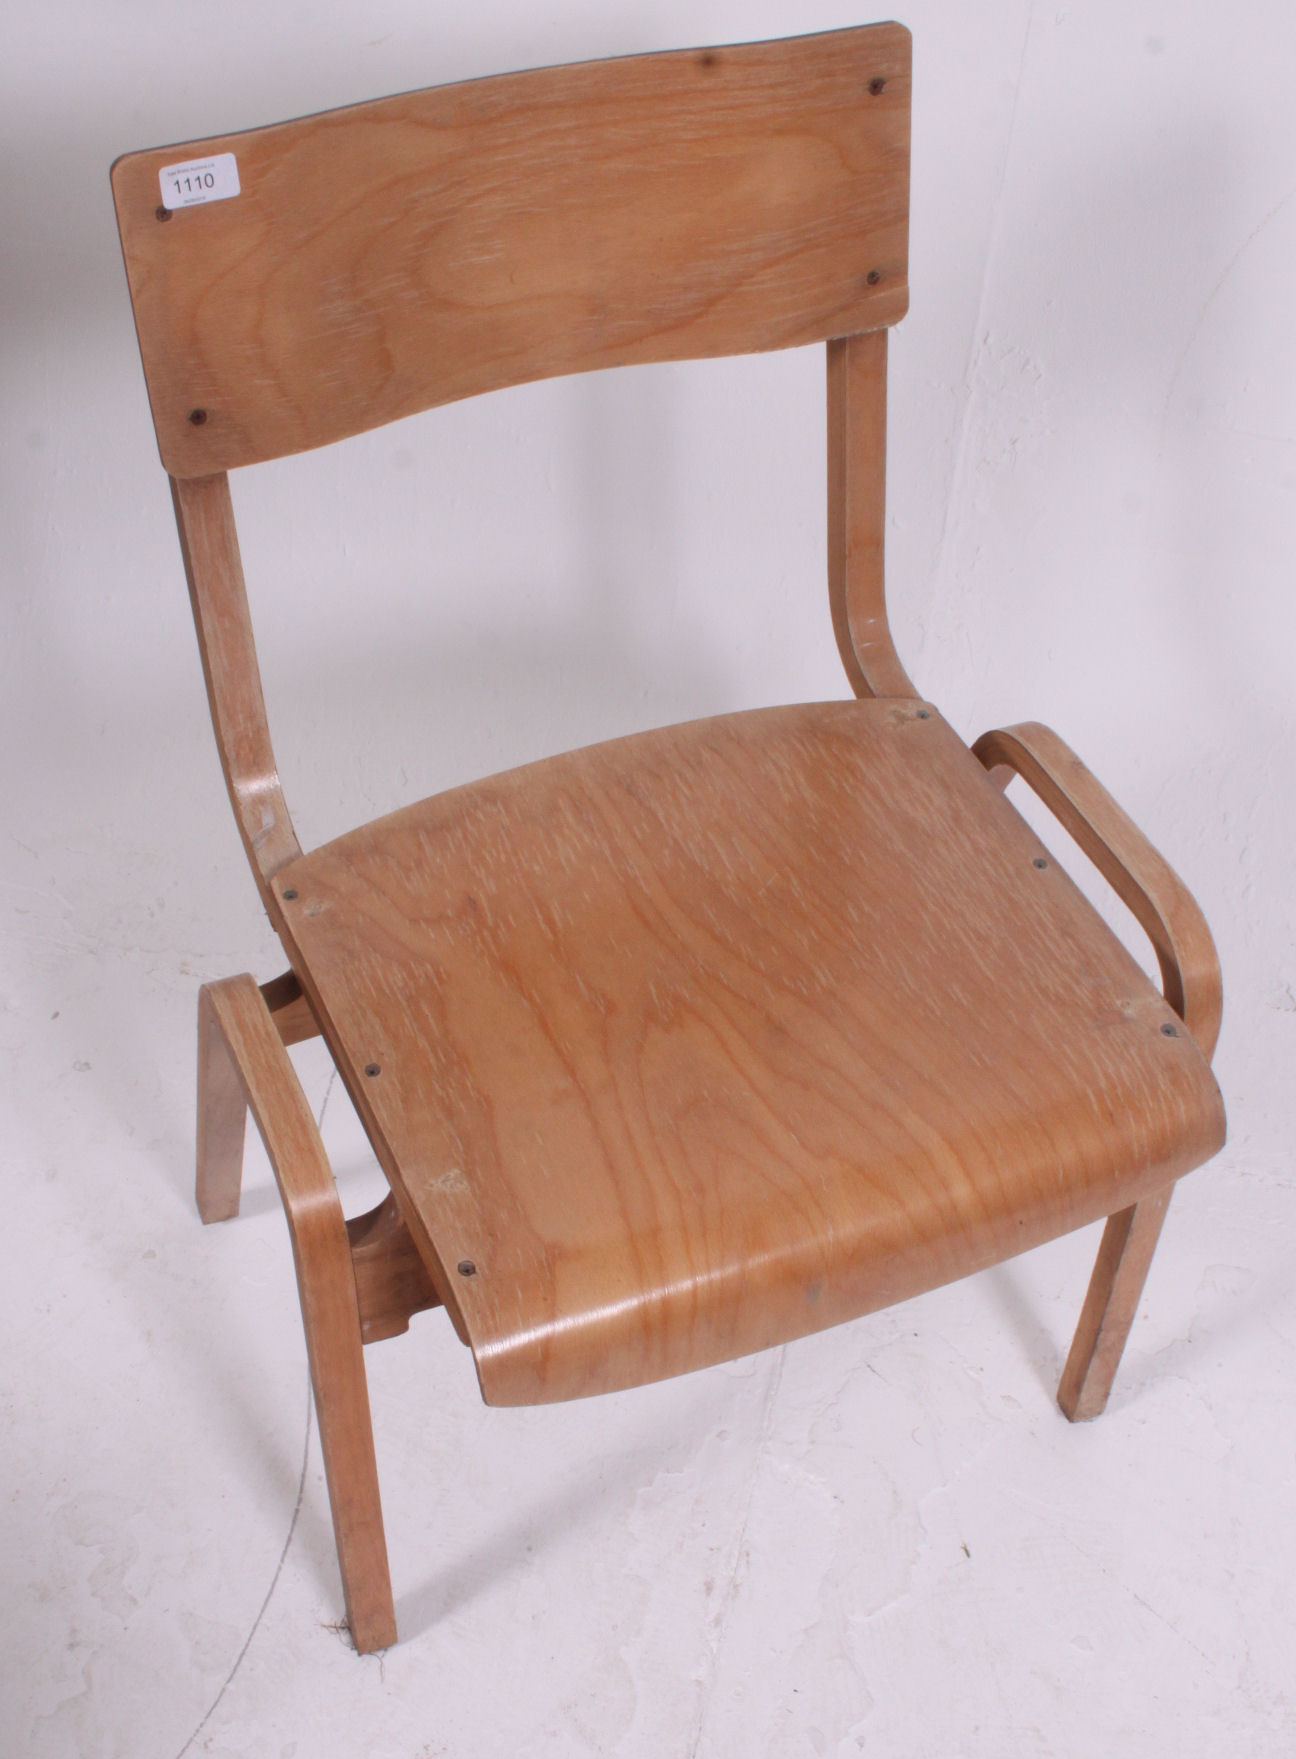 A stack of 10 retro 1950's ply panel wood Industrial school chairs raised on bentwood legs with - Image 4 of 5